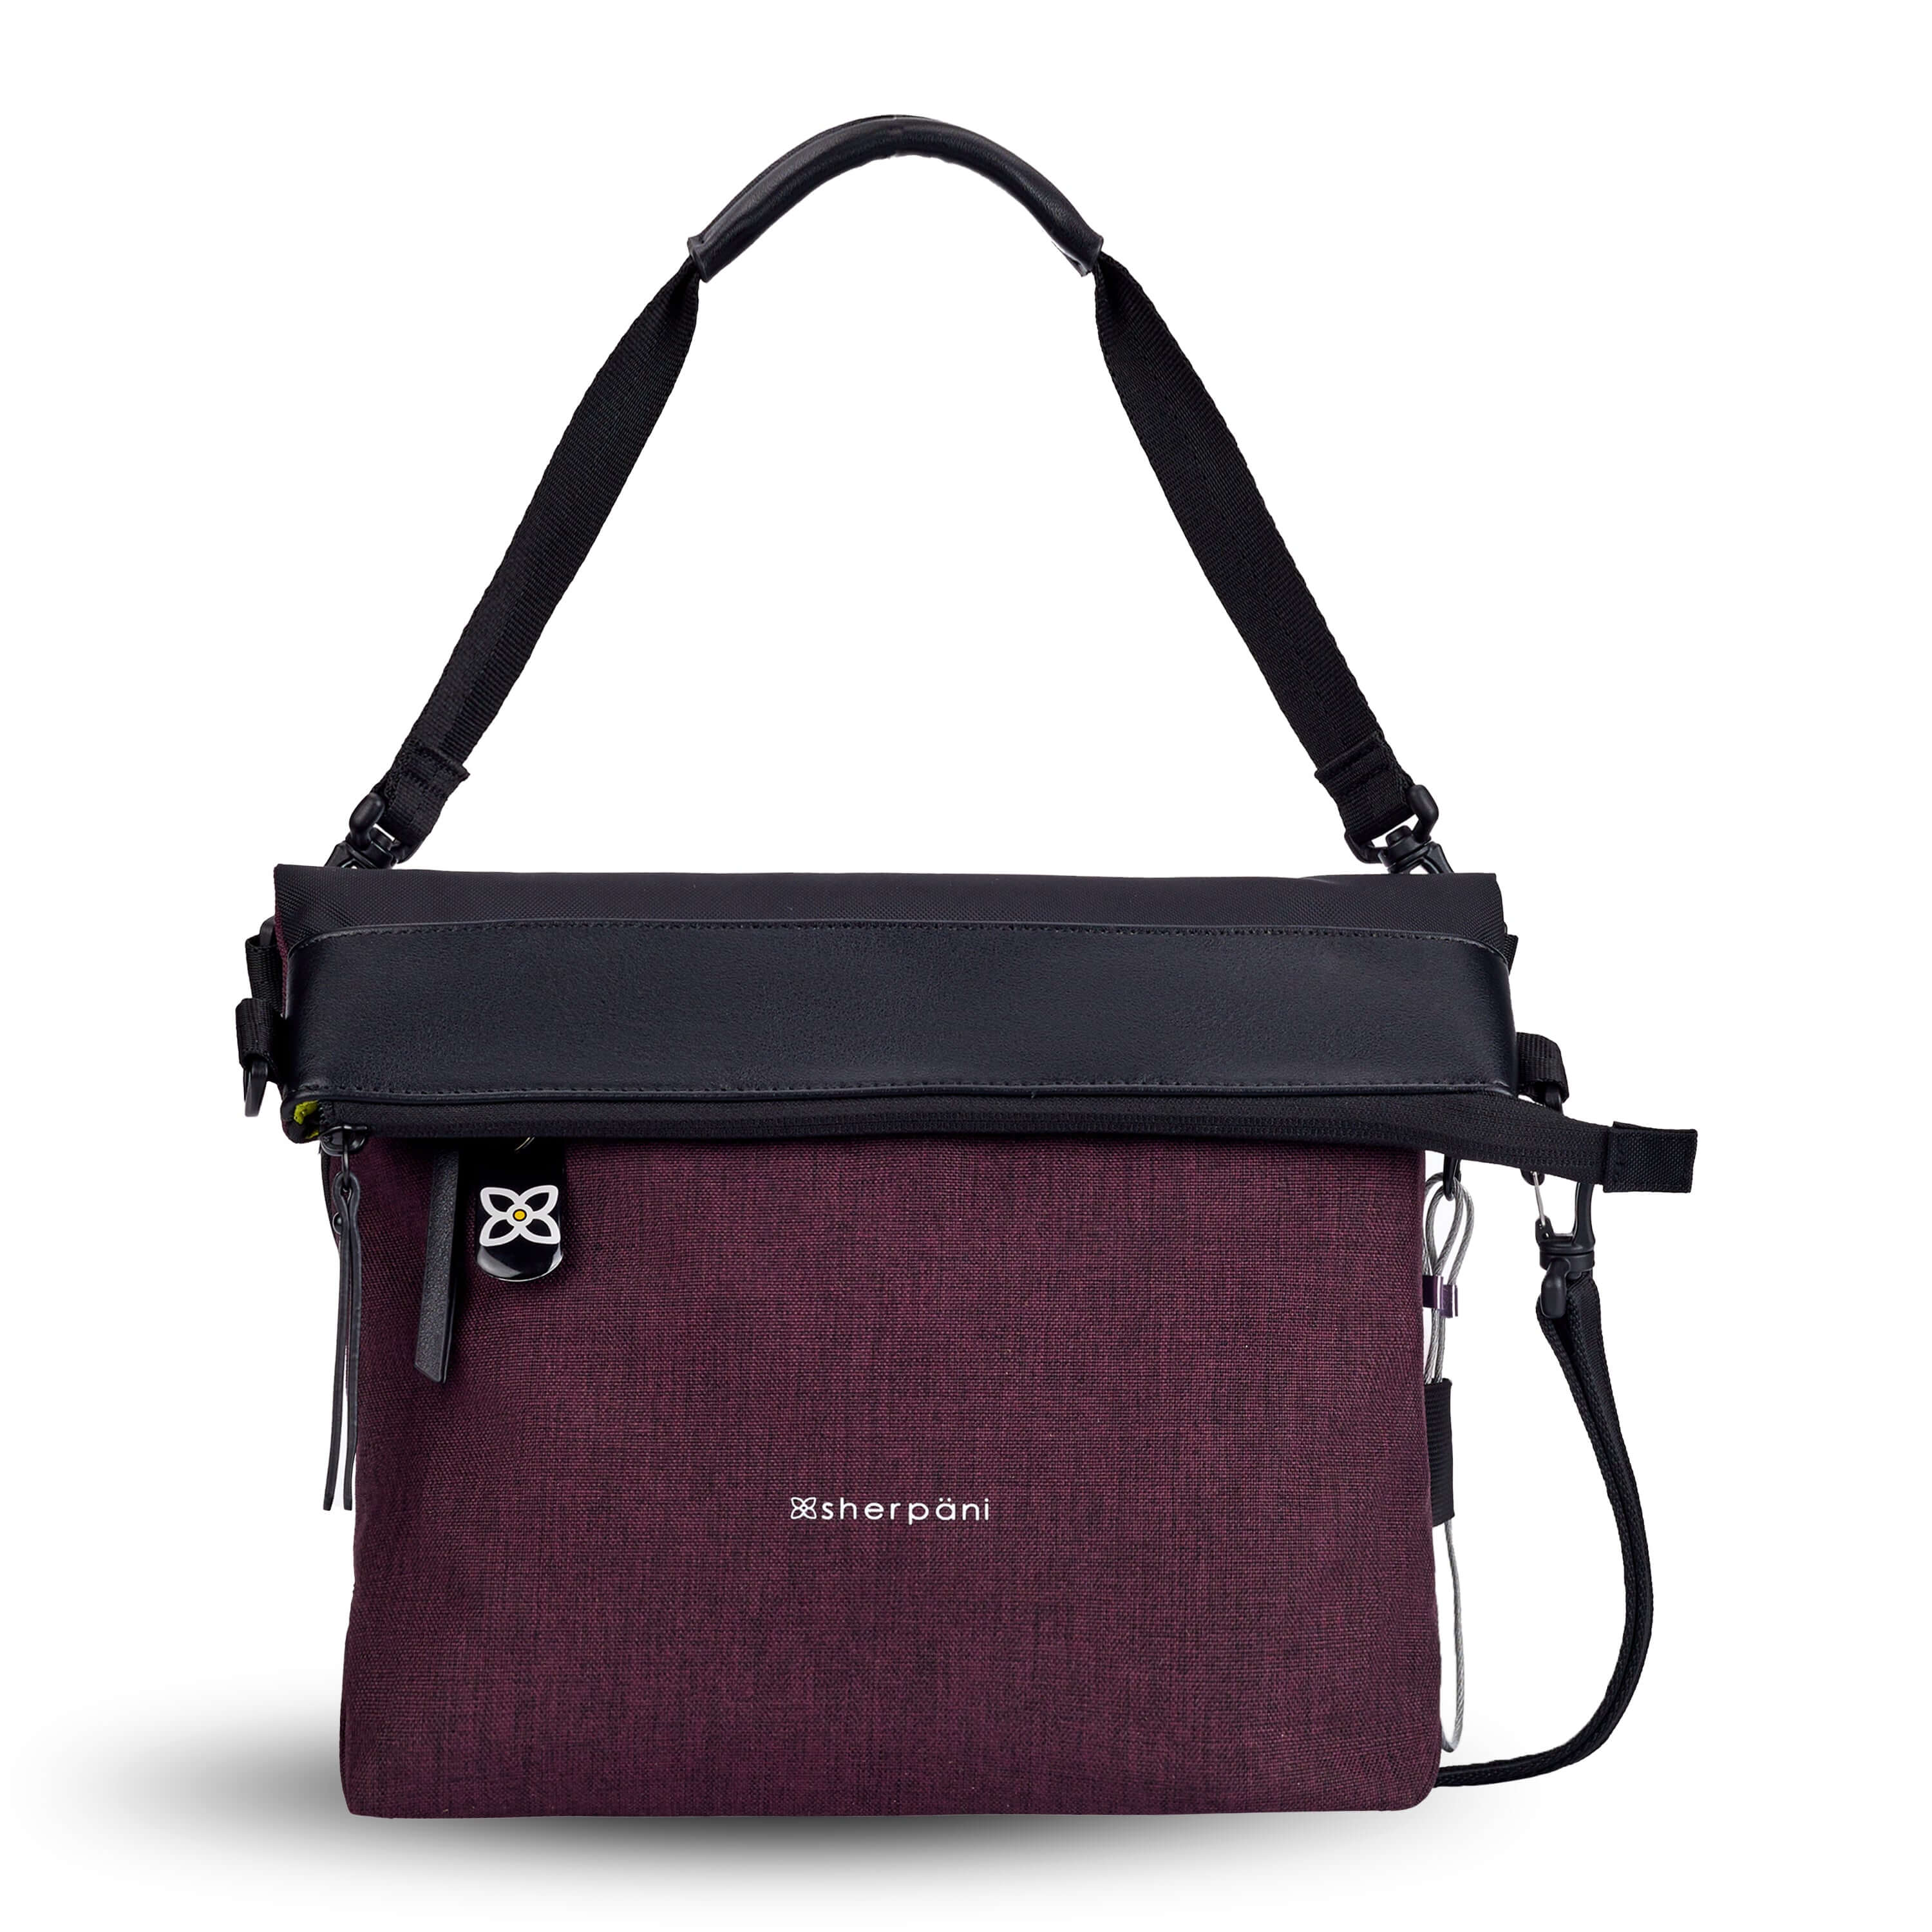 Flat front view of Sherpani&#39;s Anti-Theft bag, the Vale AT in Merlot with vegan leather accents in black. The top is folded over creating a two-toned reversible overlap. A chair loop lock is clipped onto one side, secured in place by an elastic tab. A ReturnMe tag is attached to the front zipper compartment. It has an adjustable/detachable crossbody strap, and a second detachable strap fixed at a shorter length.